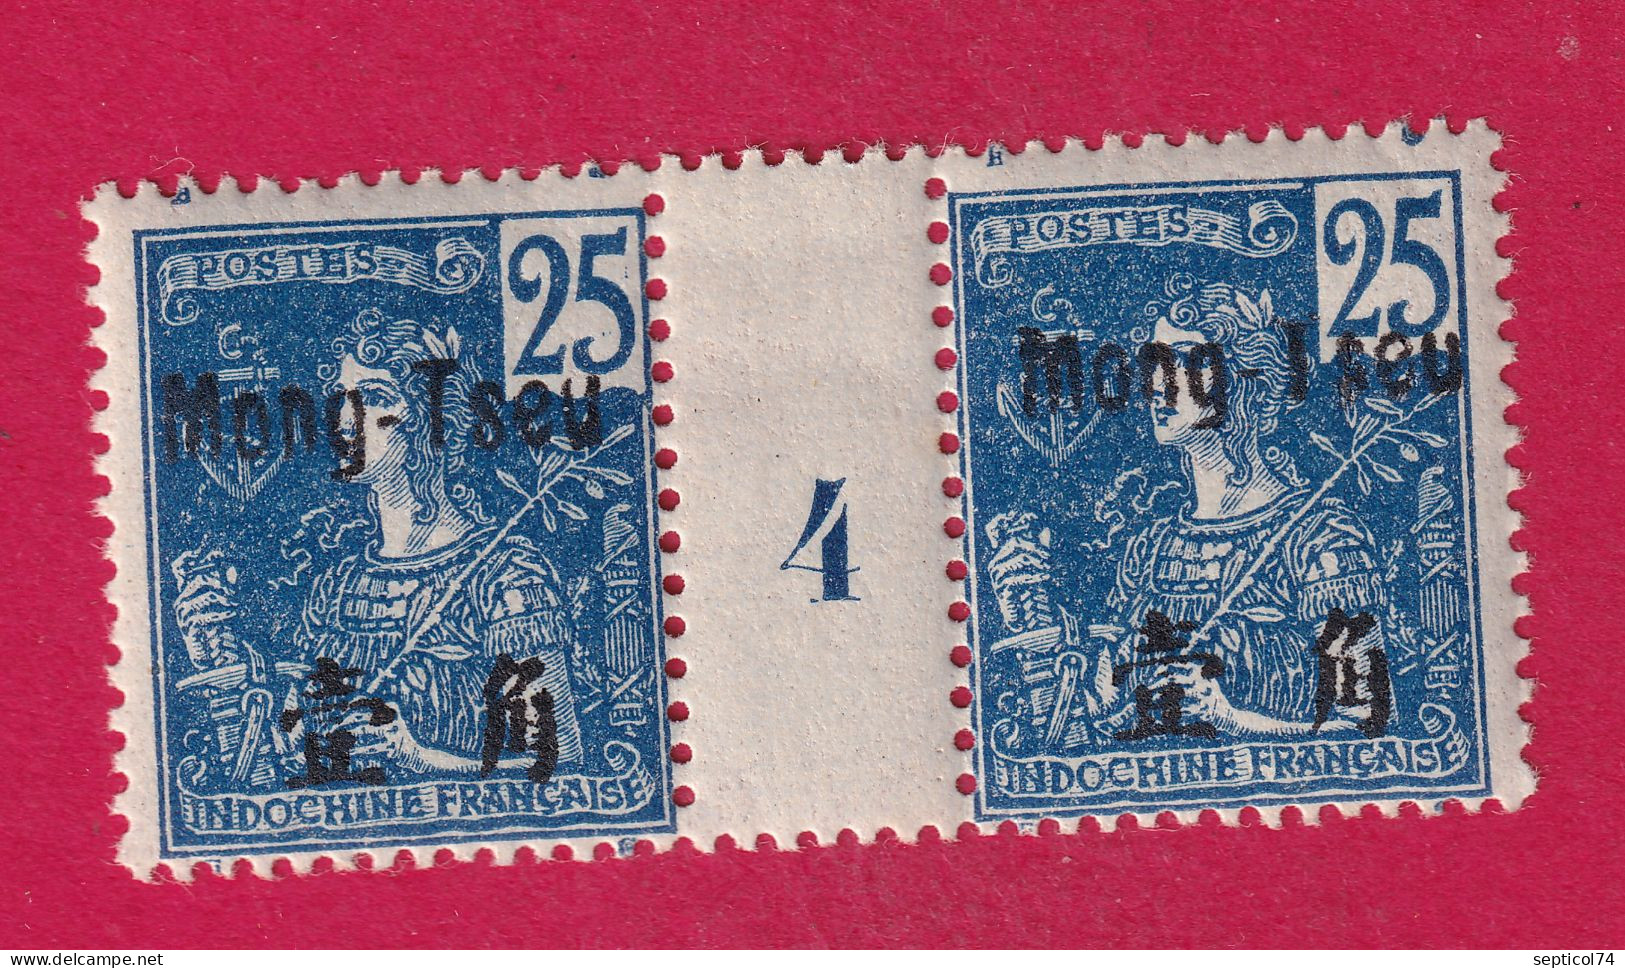 MONG TZEU CHINE N°24 PAIRE MILLESIME 4 NEUF SANS CHARNIERE COTE 320€ TIMBRE STAMP BRIEFMARKEN CHINA - Unused Stamps